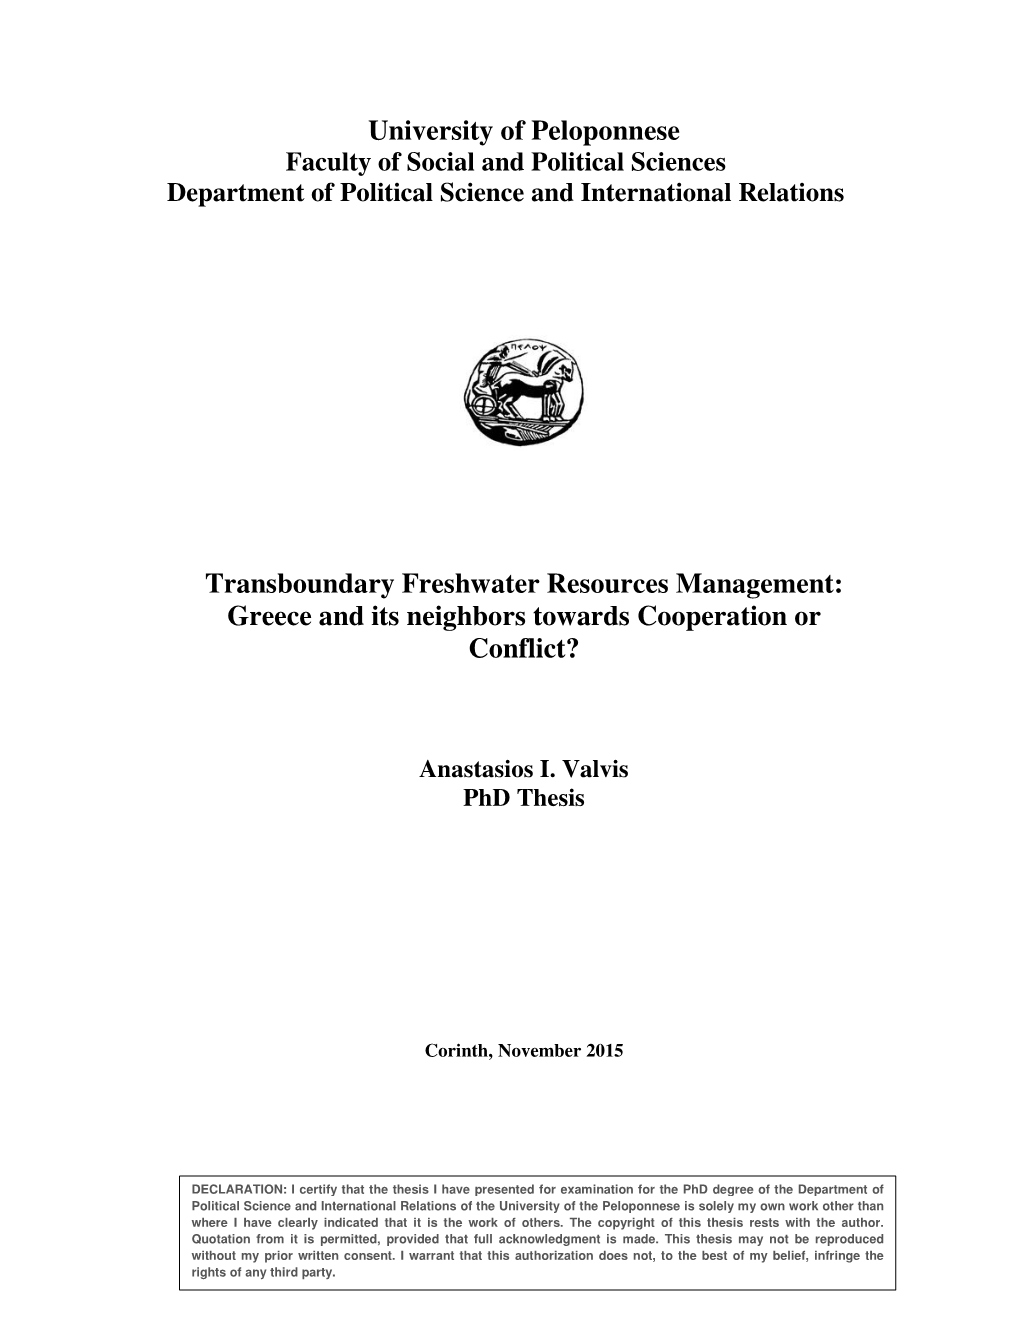 Transboundary Freshwater Resources Management: Greece and Its Neighbors Towards Cooperation Or Conflict?